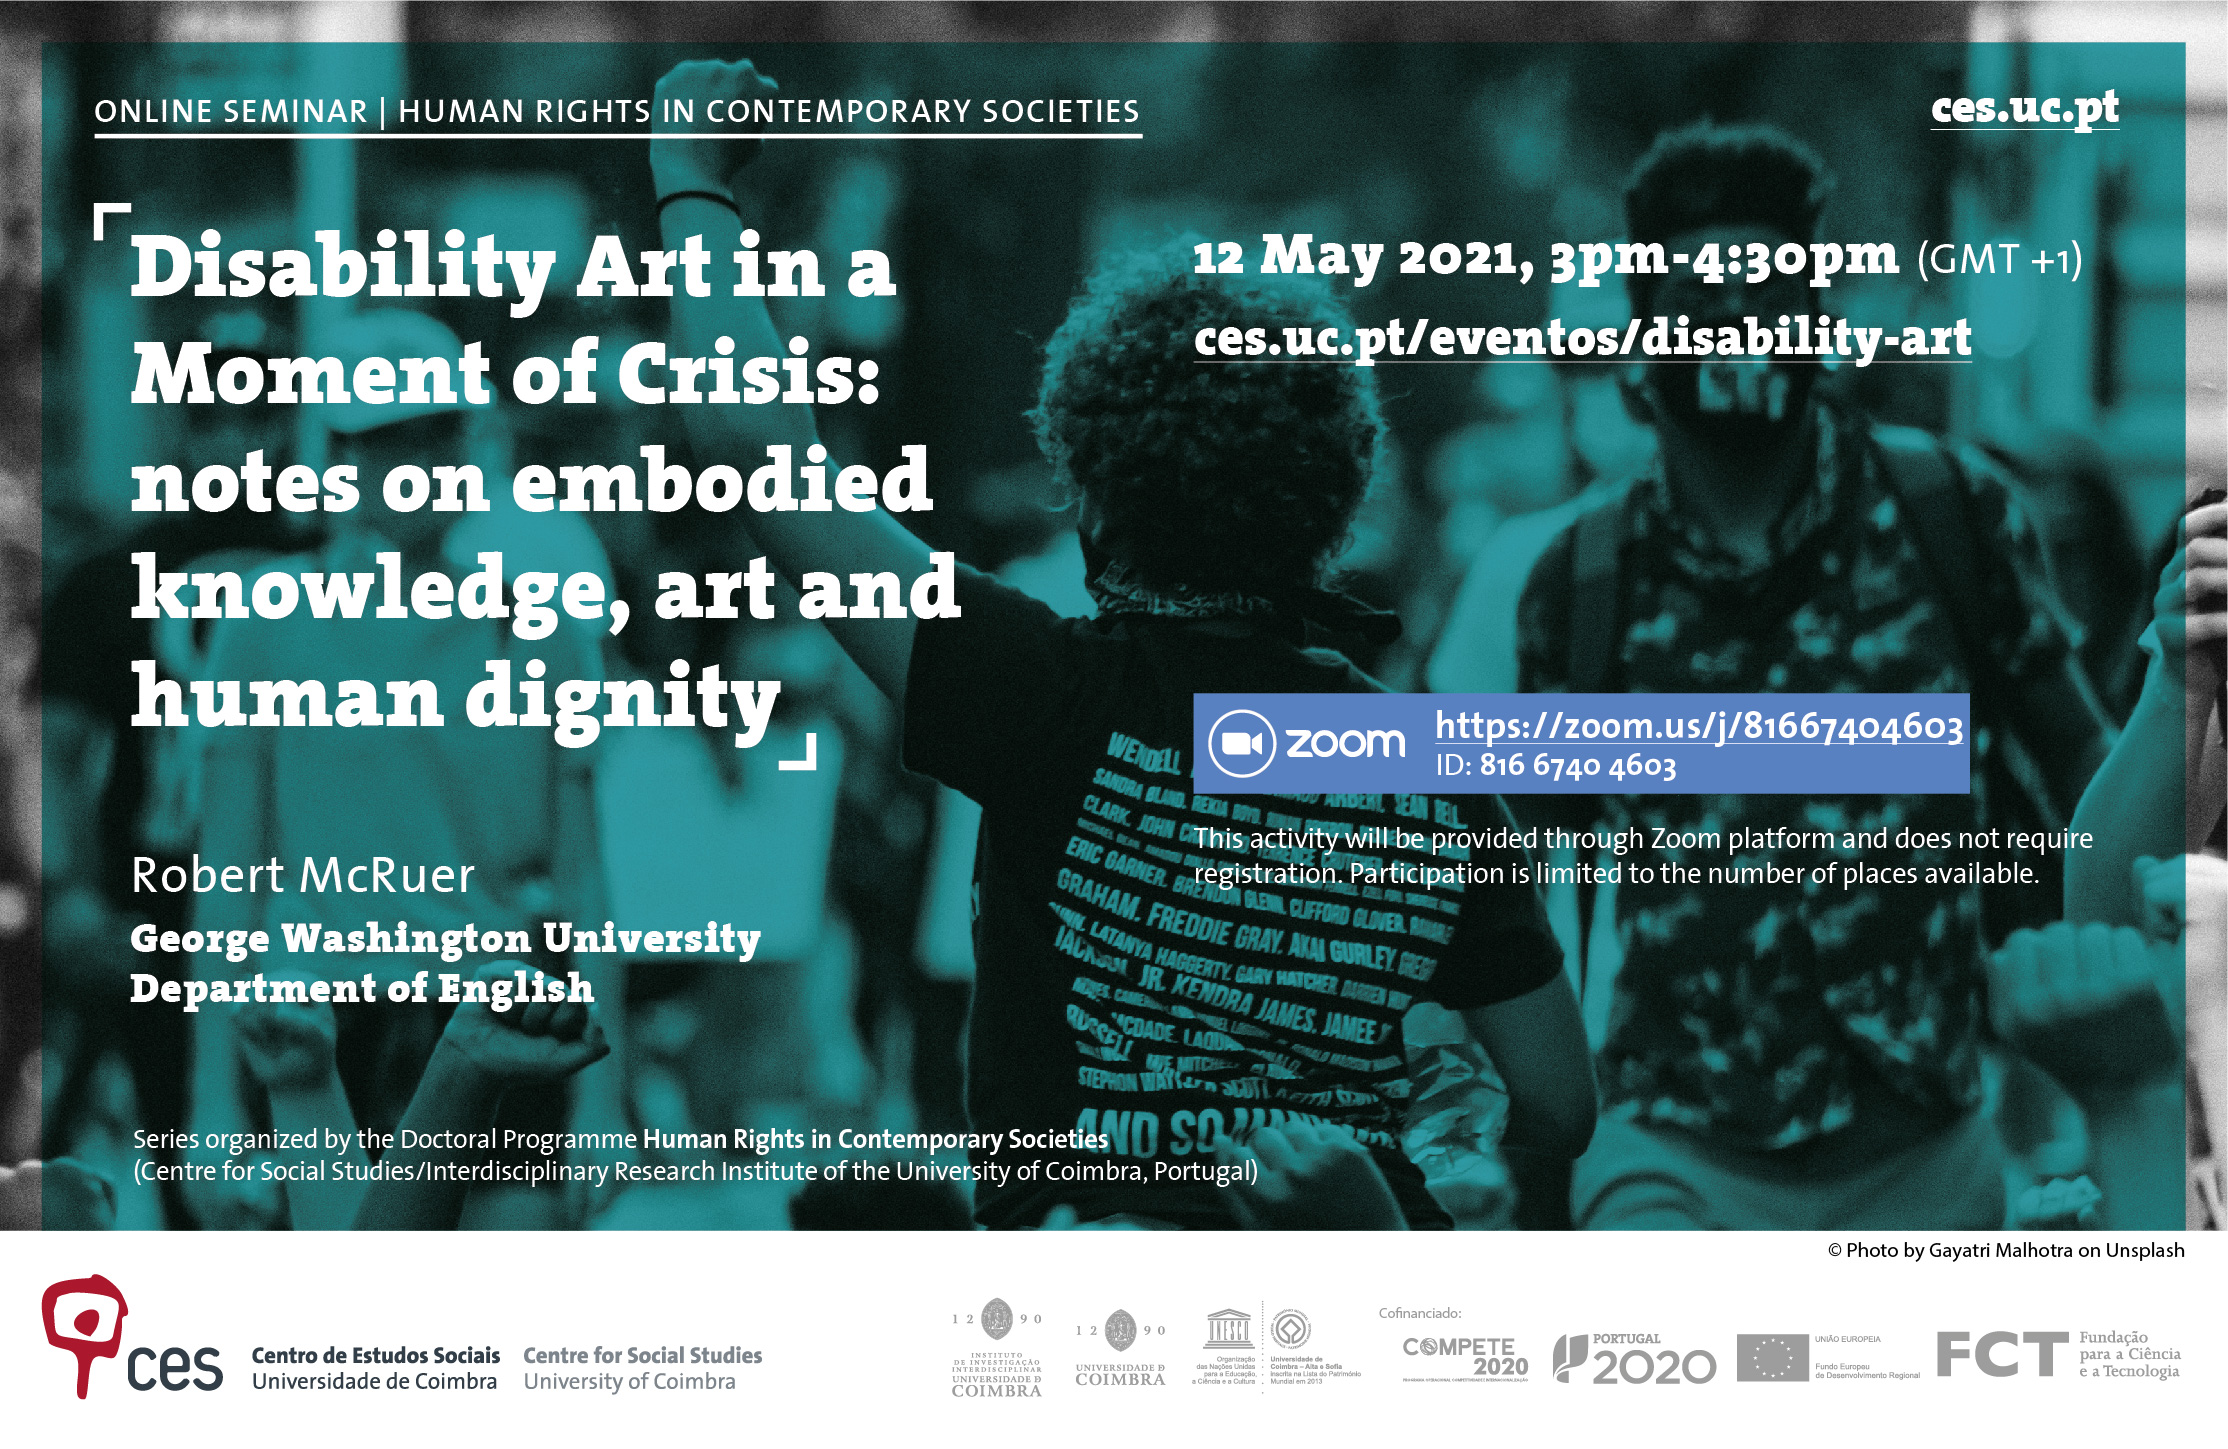 Disability Art in a Moment of Crisis: notes on embodied knowledge, art and human dignity <span id="edit_33520"><script>$(function() { $('#edit_33520').load( "/myces/user/editobj.php?tipo=evento&id=33520" ); });</script></span>